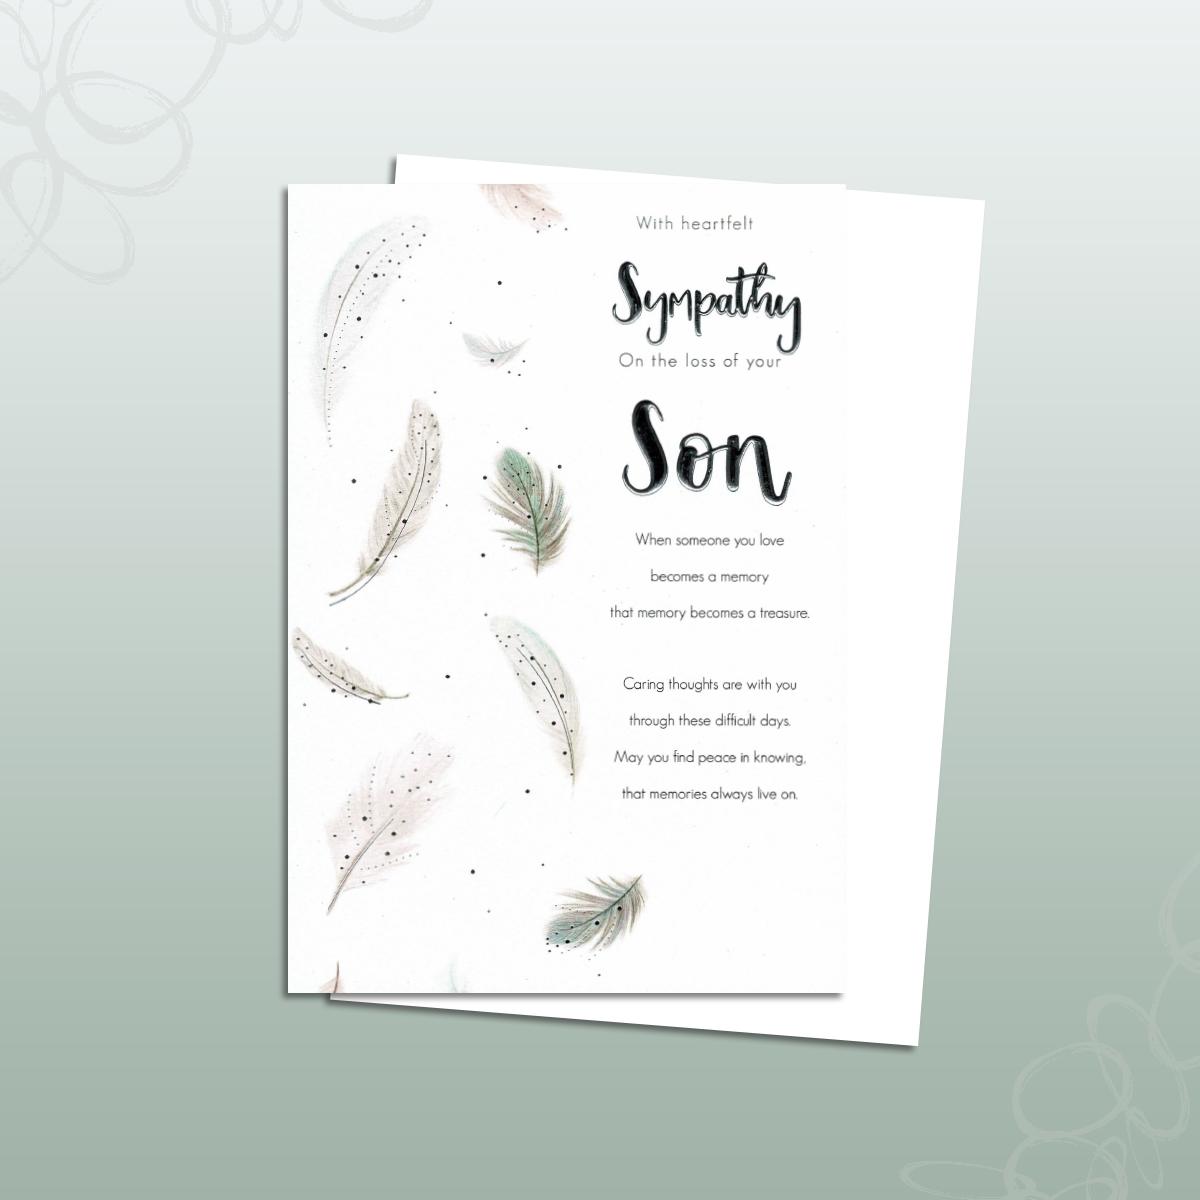 SINCERE SYMPATHY CARD ON THE LOSS OF YOUR SON WITH WHITE ENVELOPE U.K SELLER 